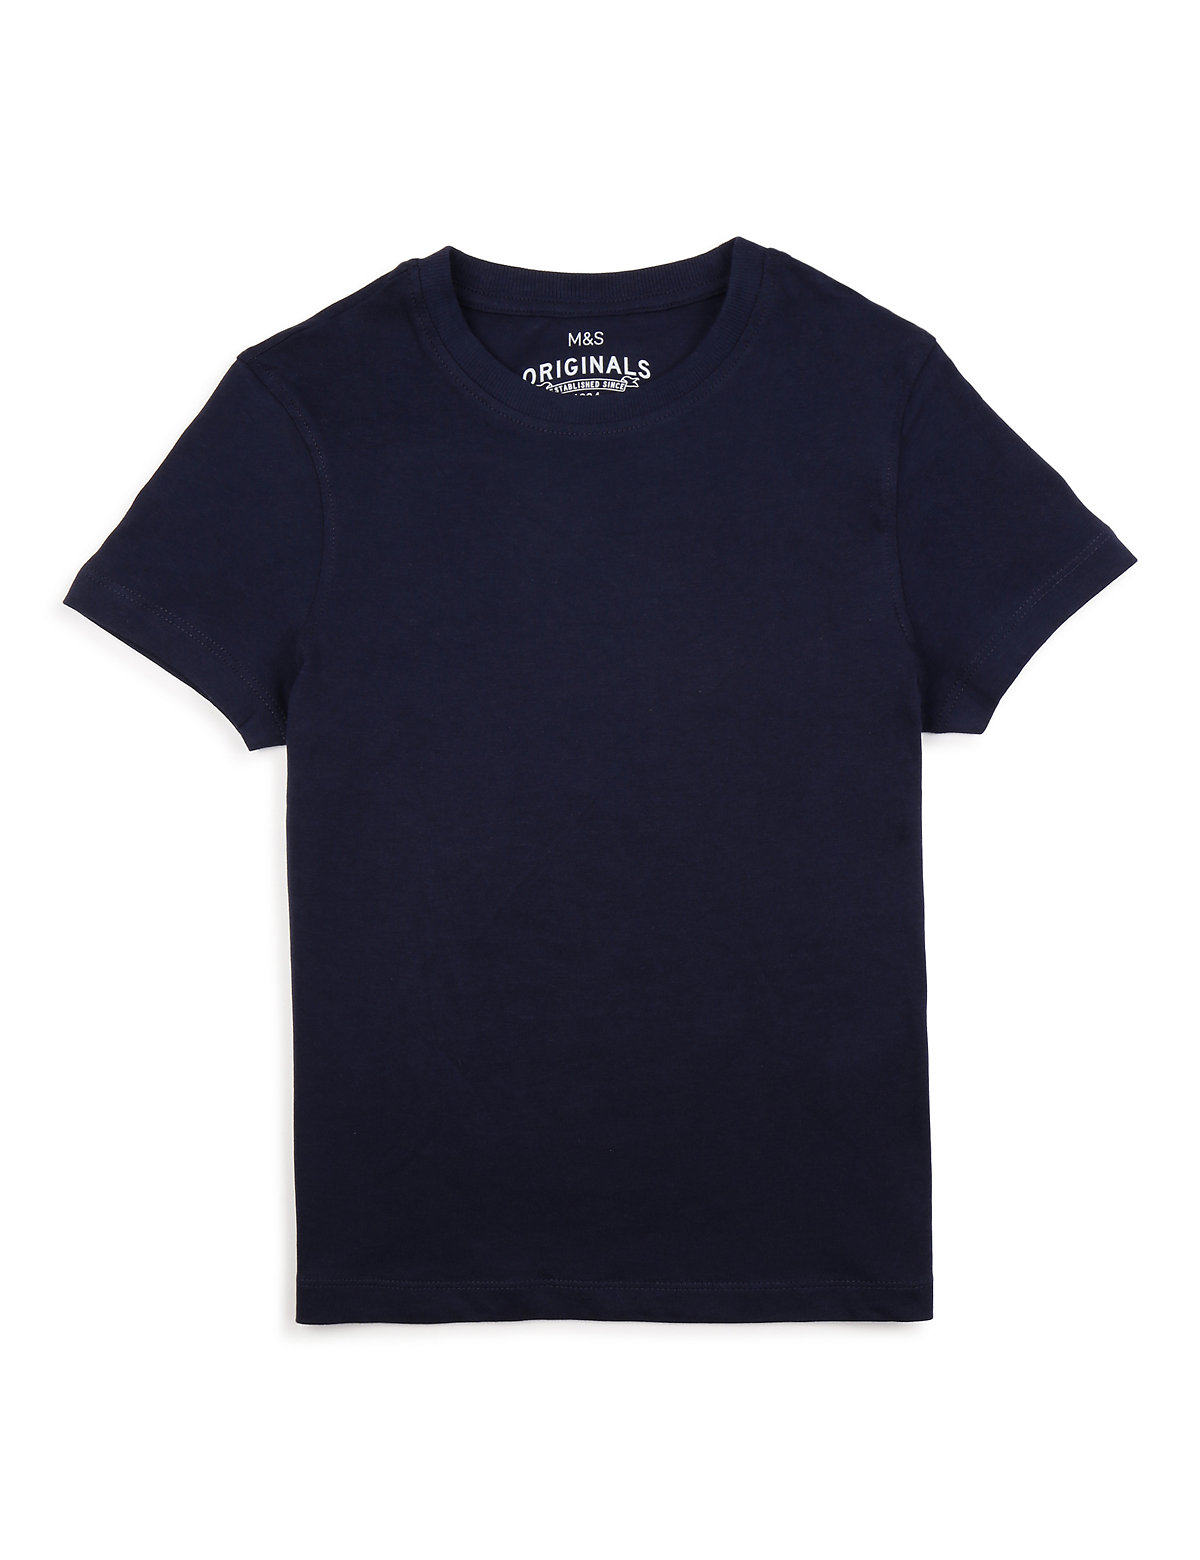 Pack of 5 Pure Cotton Crew Neck T-shirt